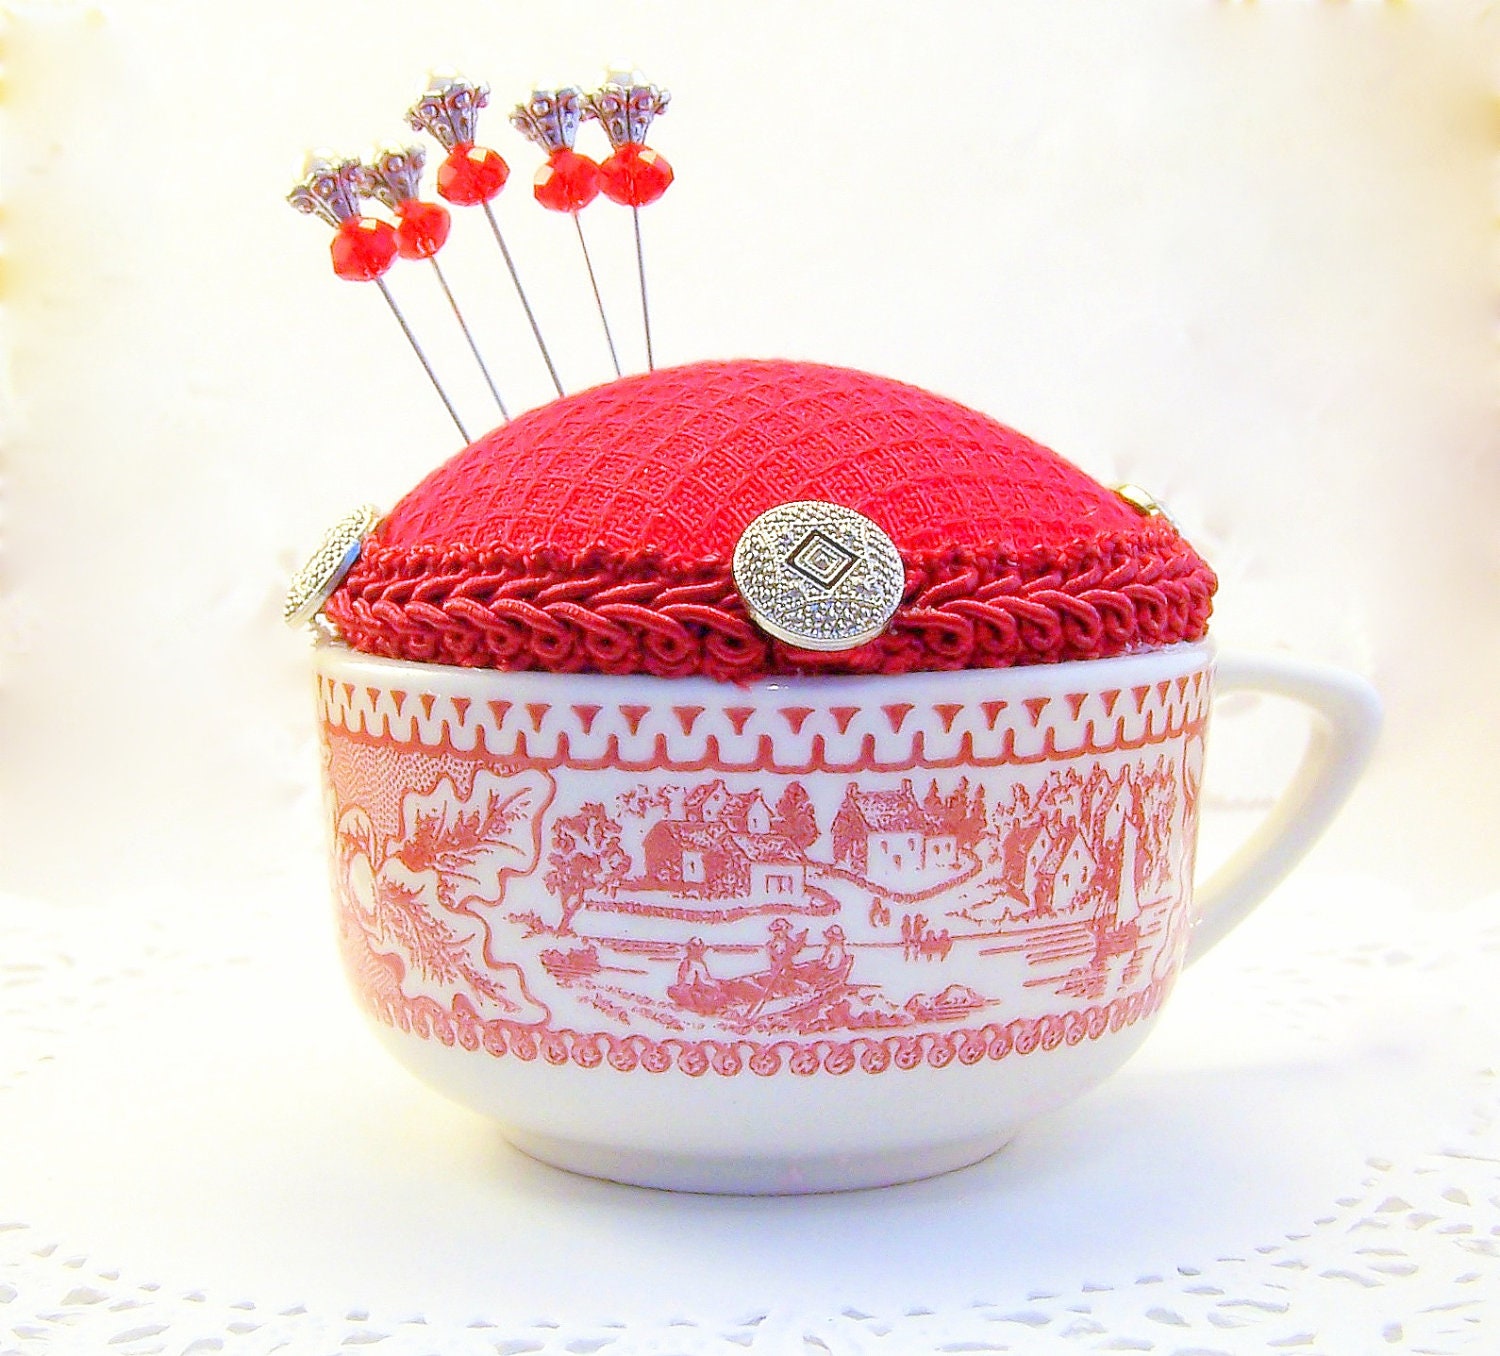 Needlecraft vintage teacup pincushion light red transferware dish holiday gift under 20 straight pins kitchen swing room quilter tagt tenx